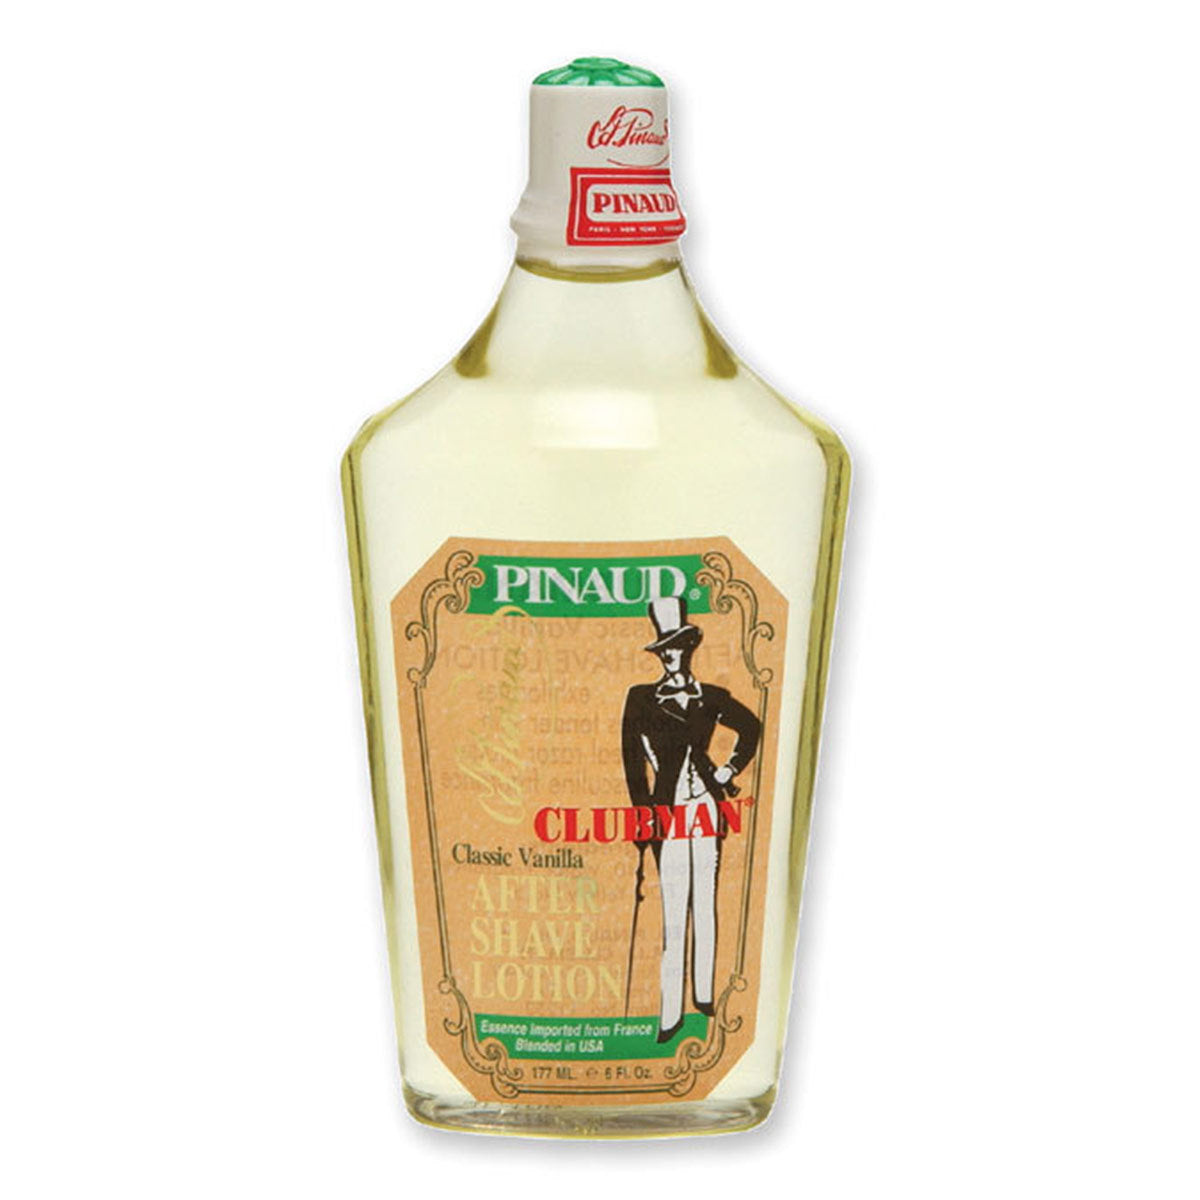 Primary image of Clubman Vanilla After Shave Lotion